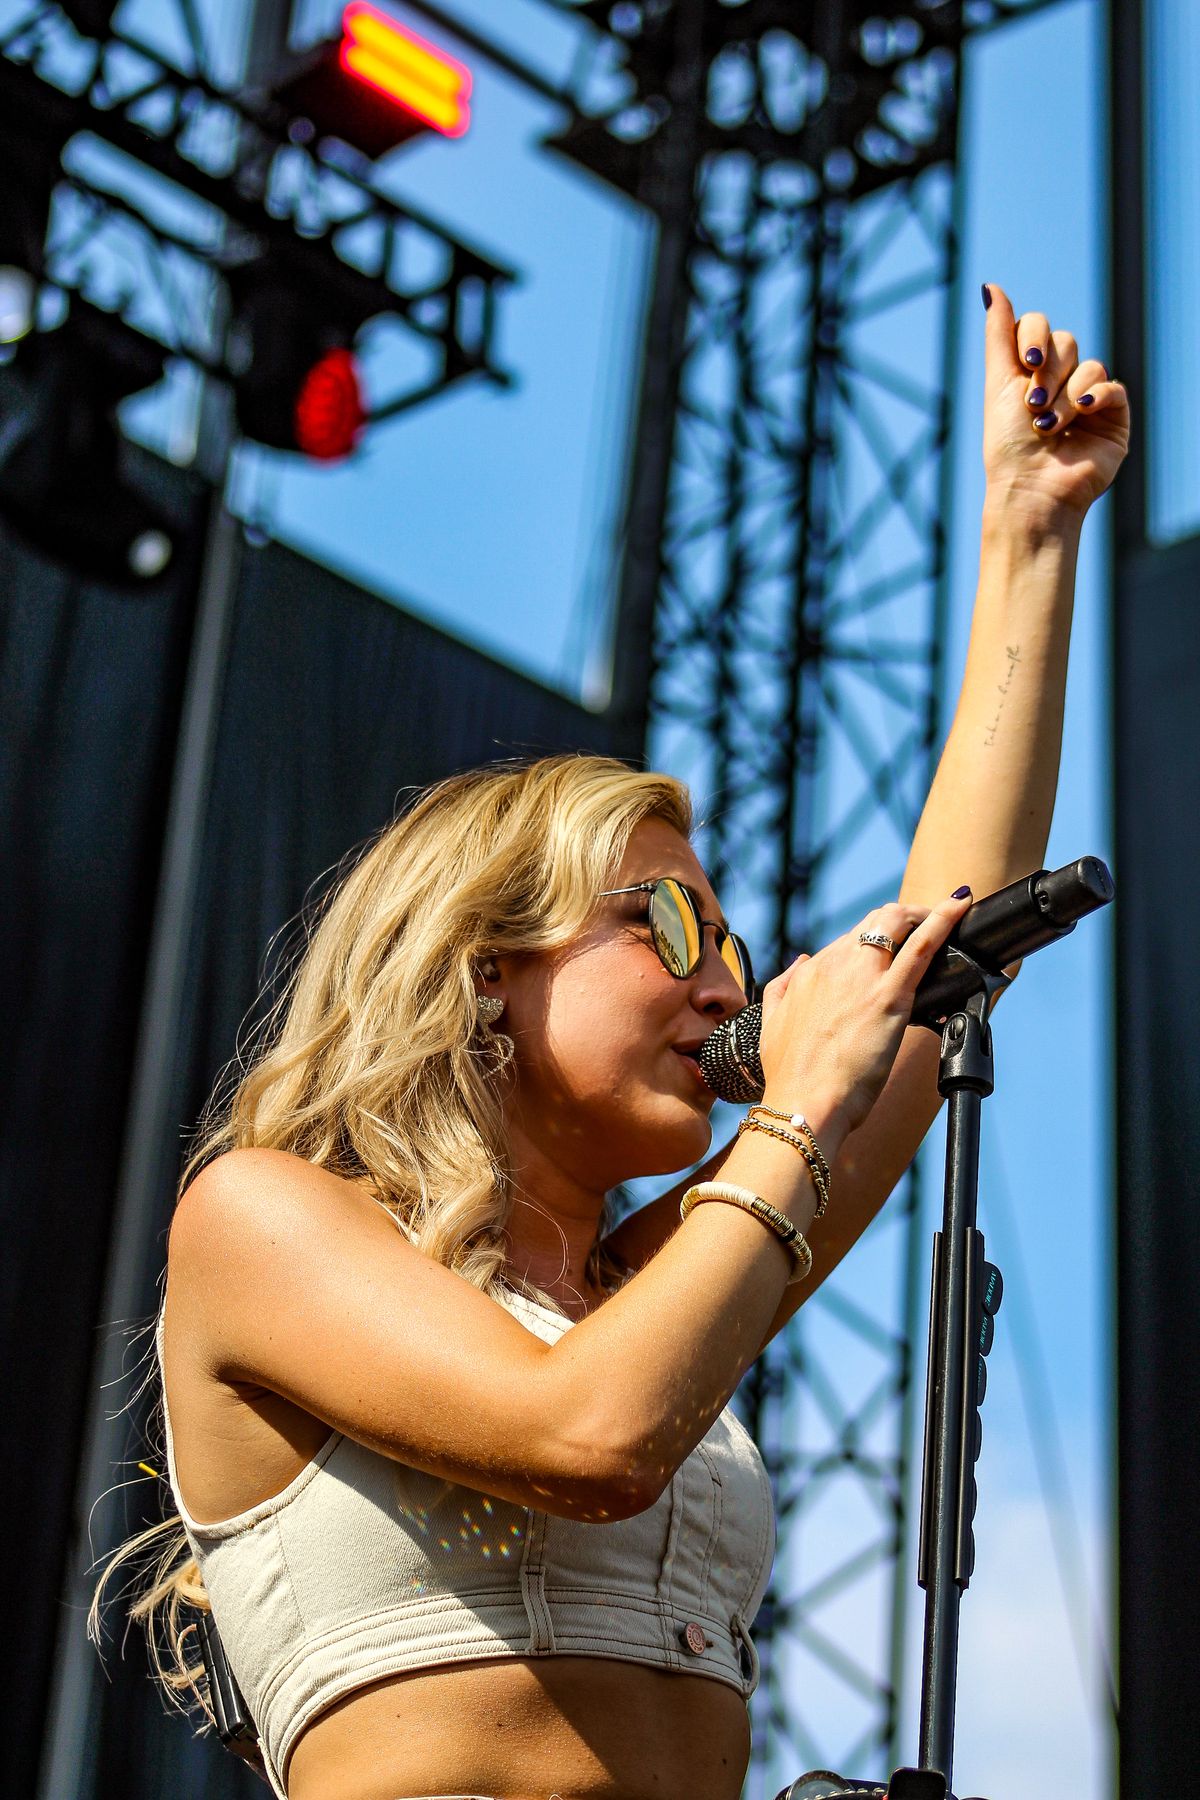 Maddie Font of Maddie & Tae plays Watershed at the Gorge solo.   (Jordan Tolley-Smith/The Spokesman-Review)